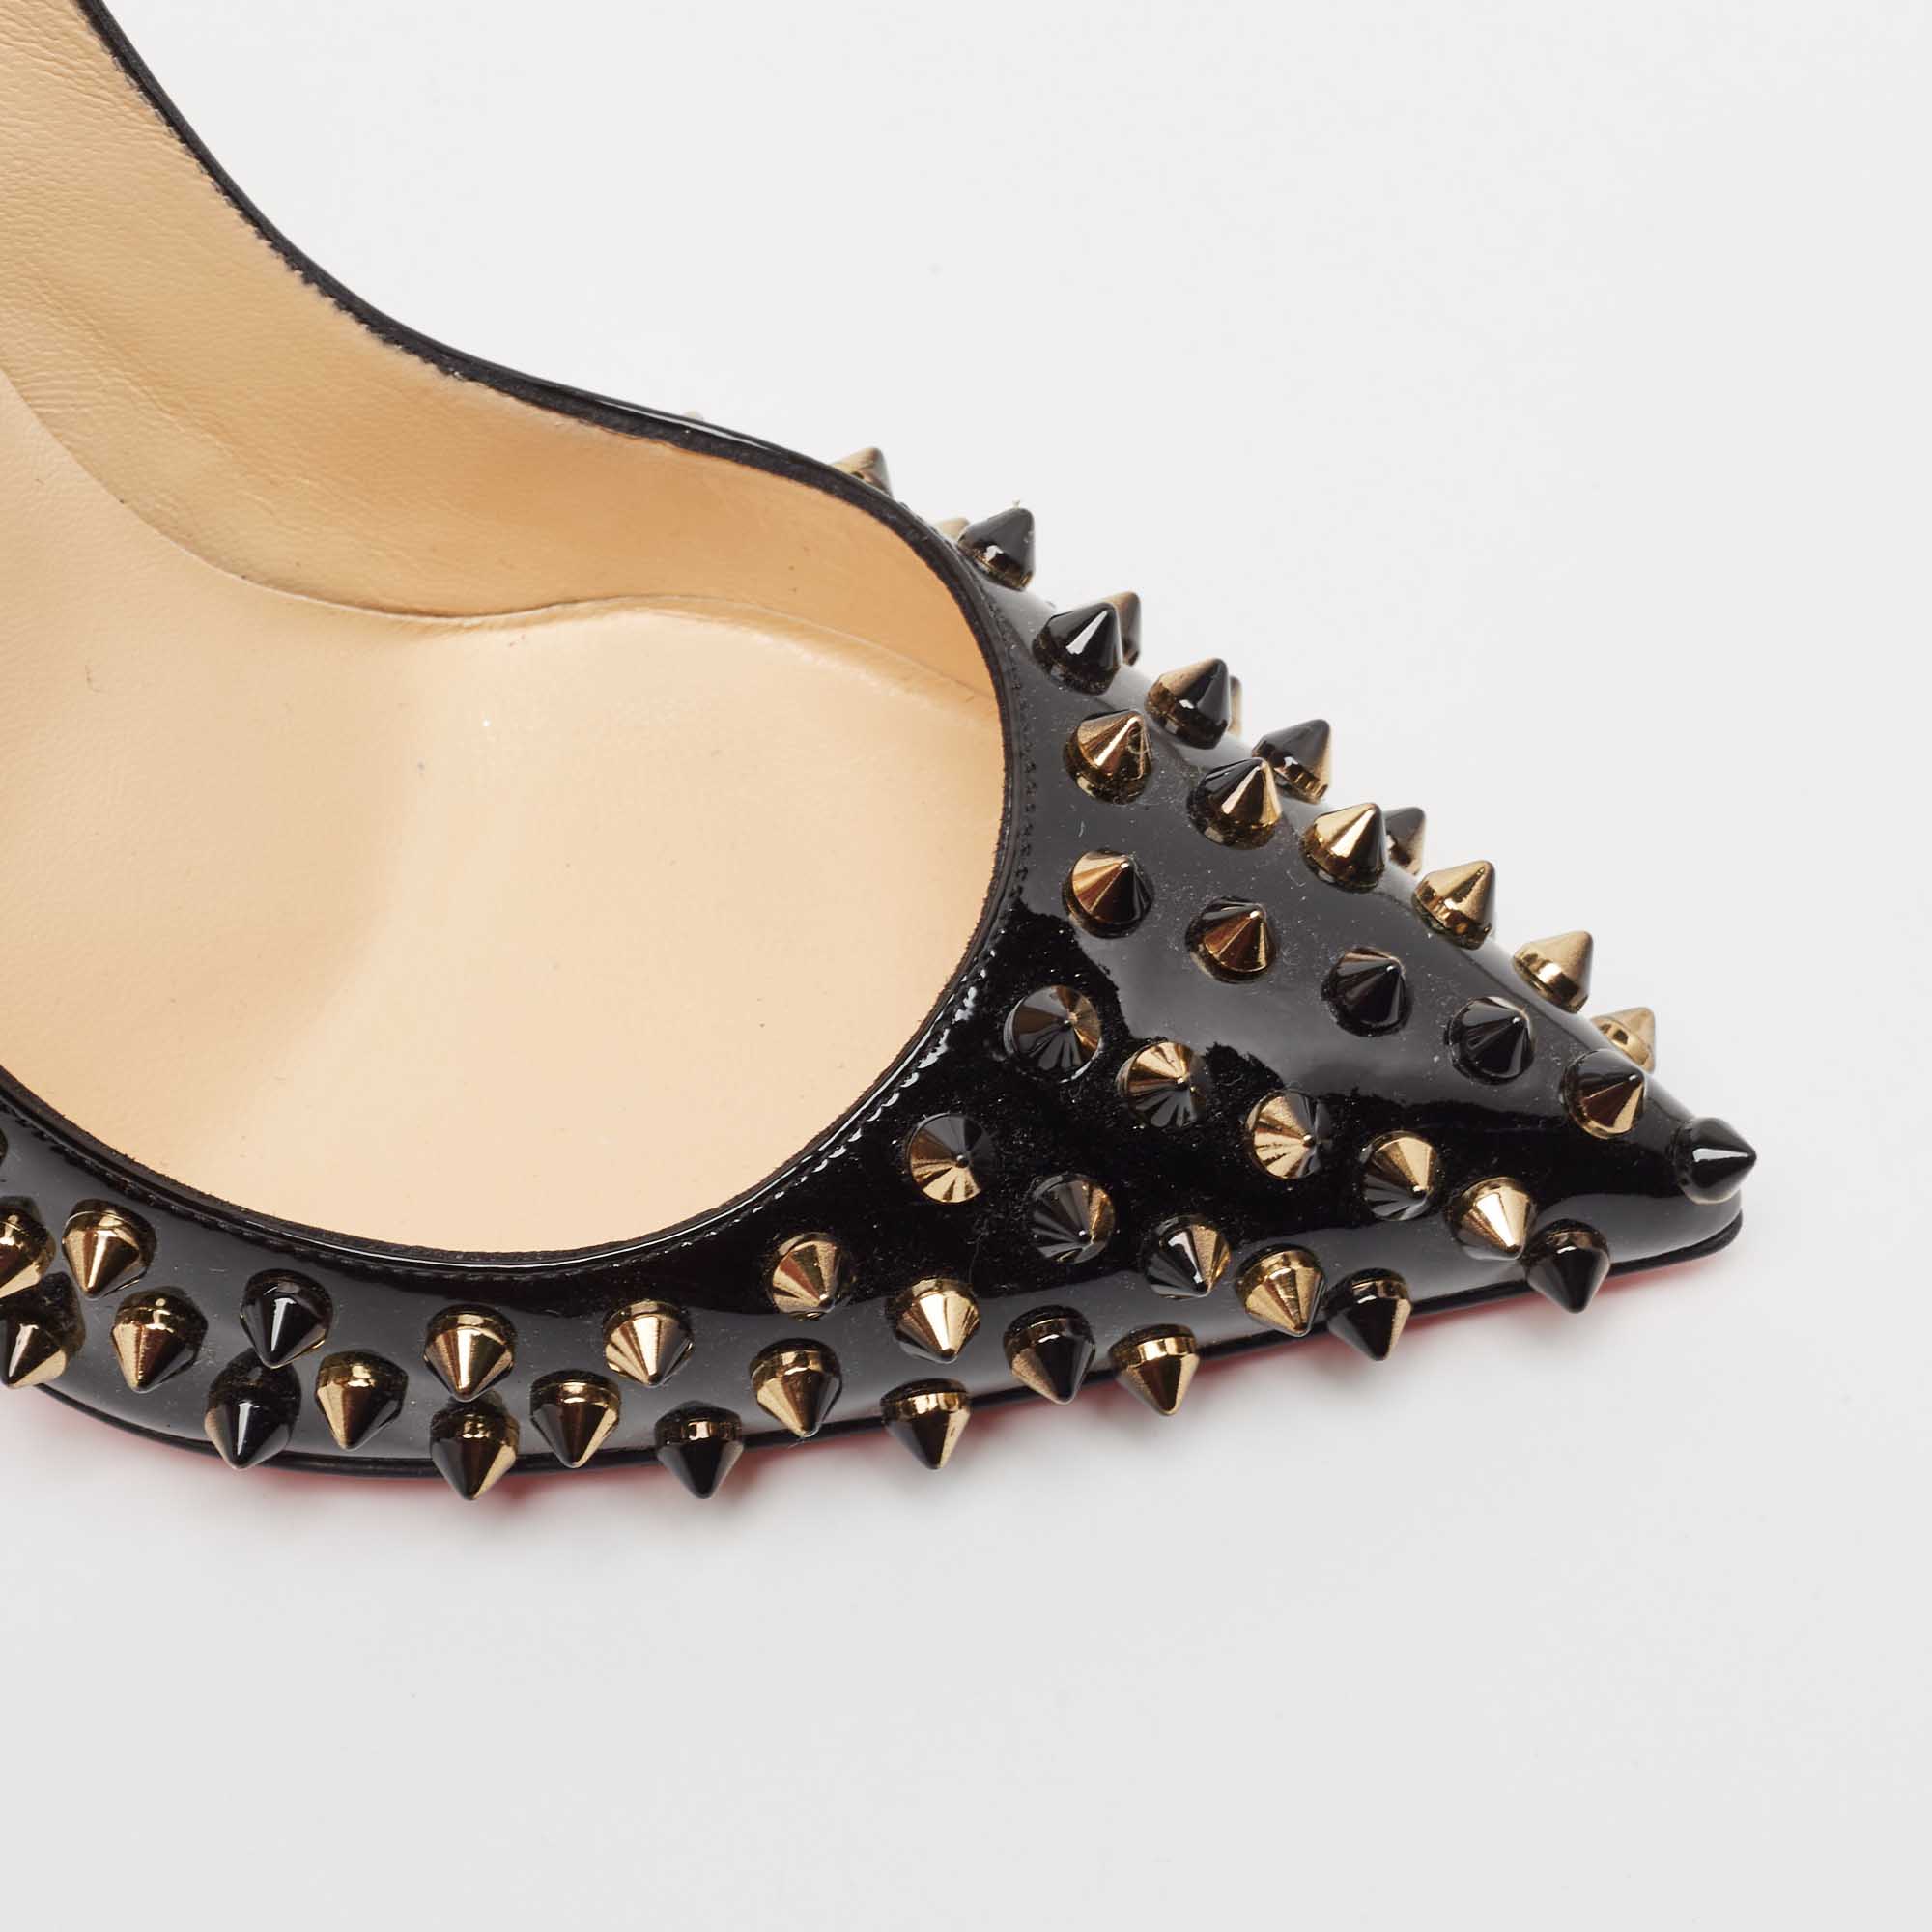 Christian Louboutin Black/Gold Patent Leather Pigalle Spikes Pumps Size 38.5